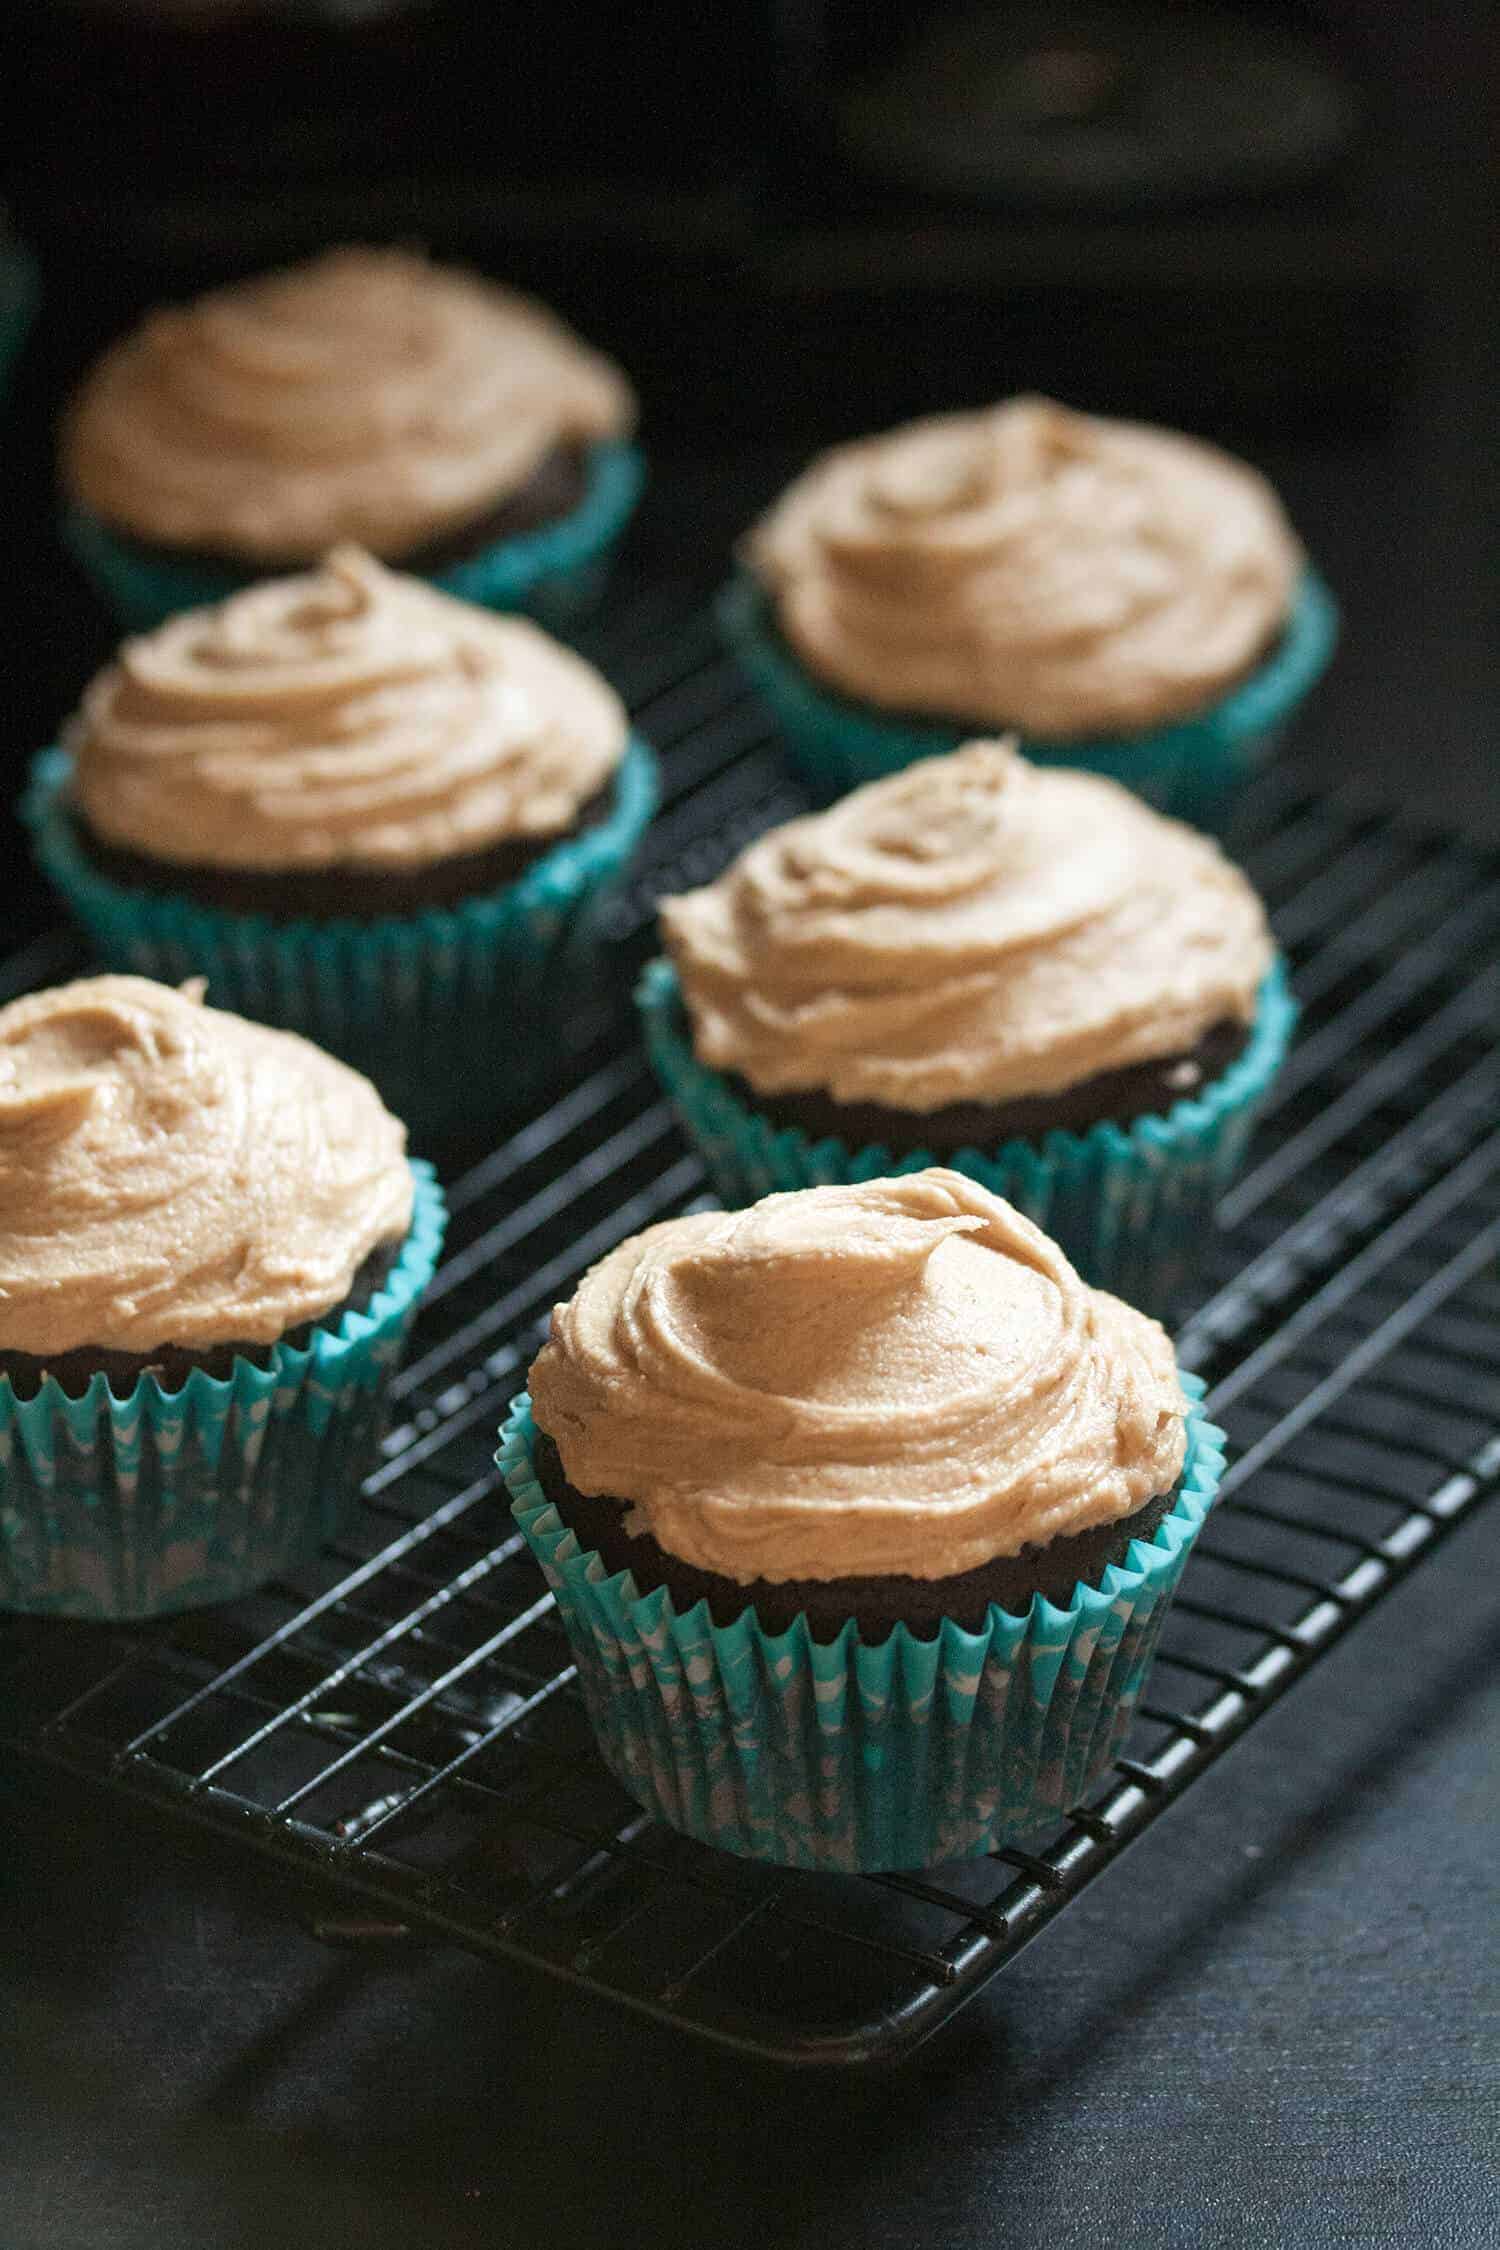 Mocha Cupcakes with Cappuccino Frosting